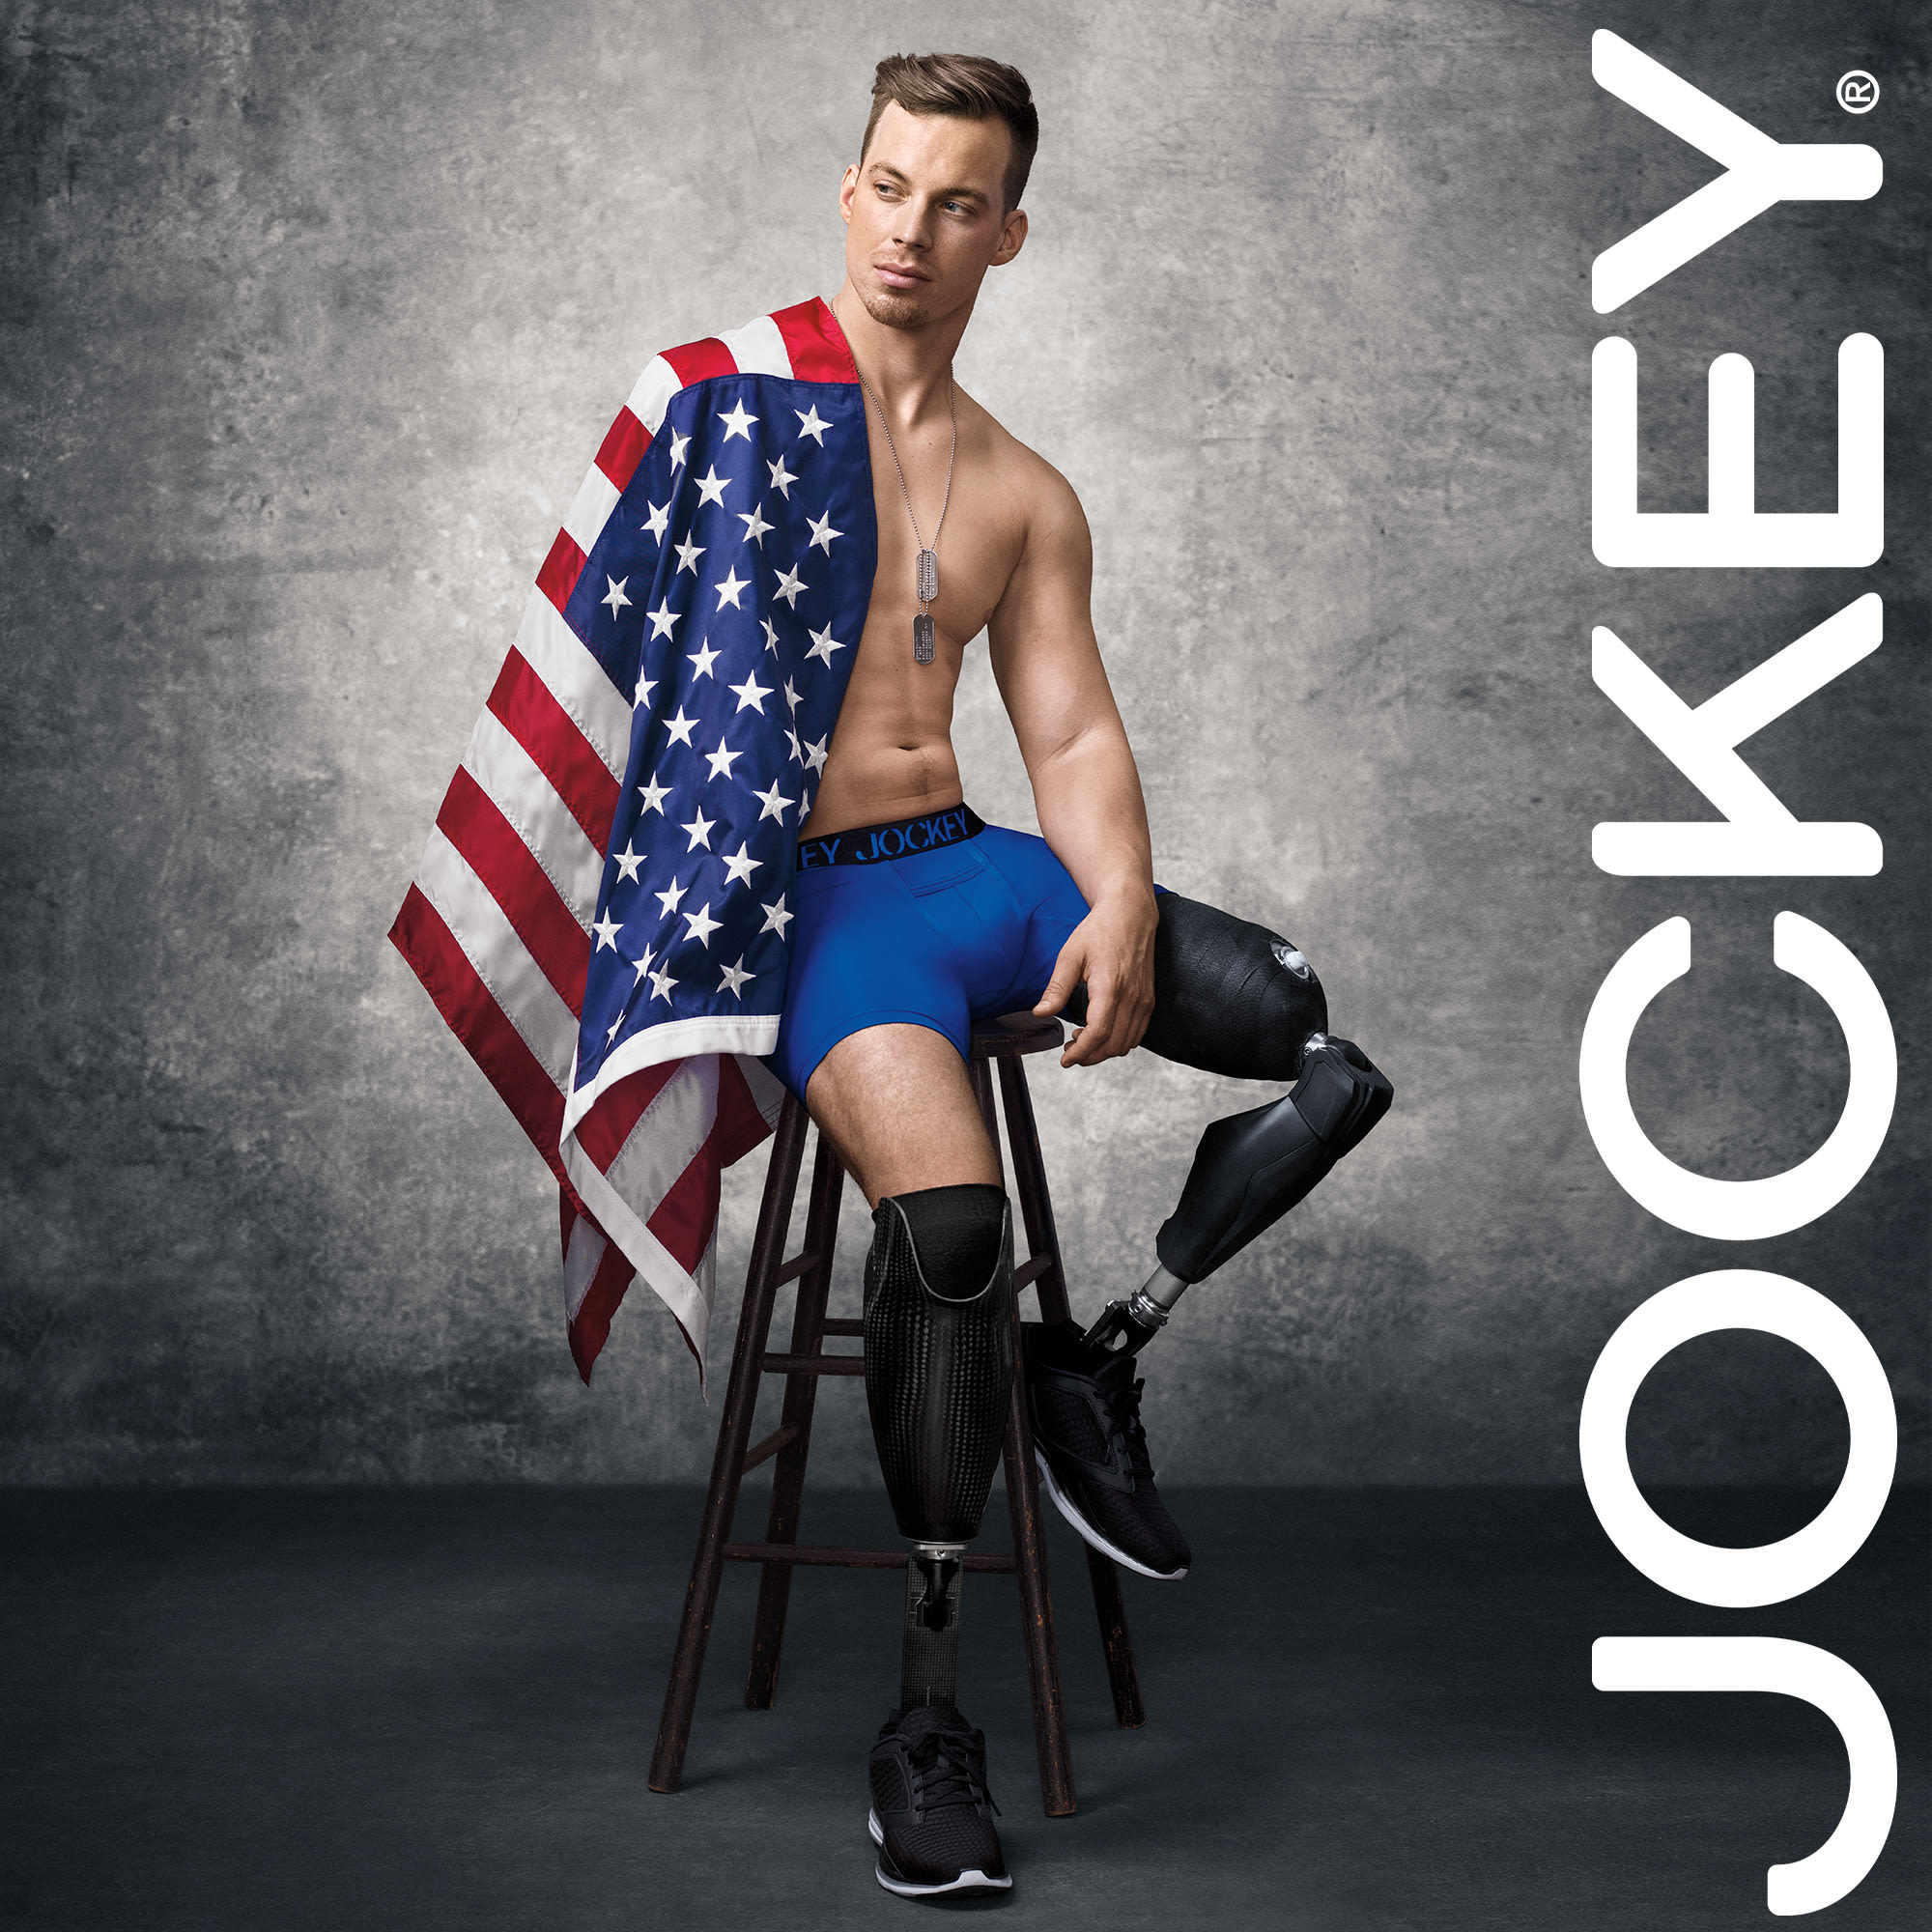 How One Marketing Campaign Made Jockey Become Relevant Again